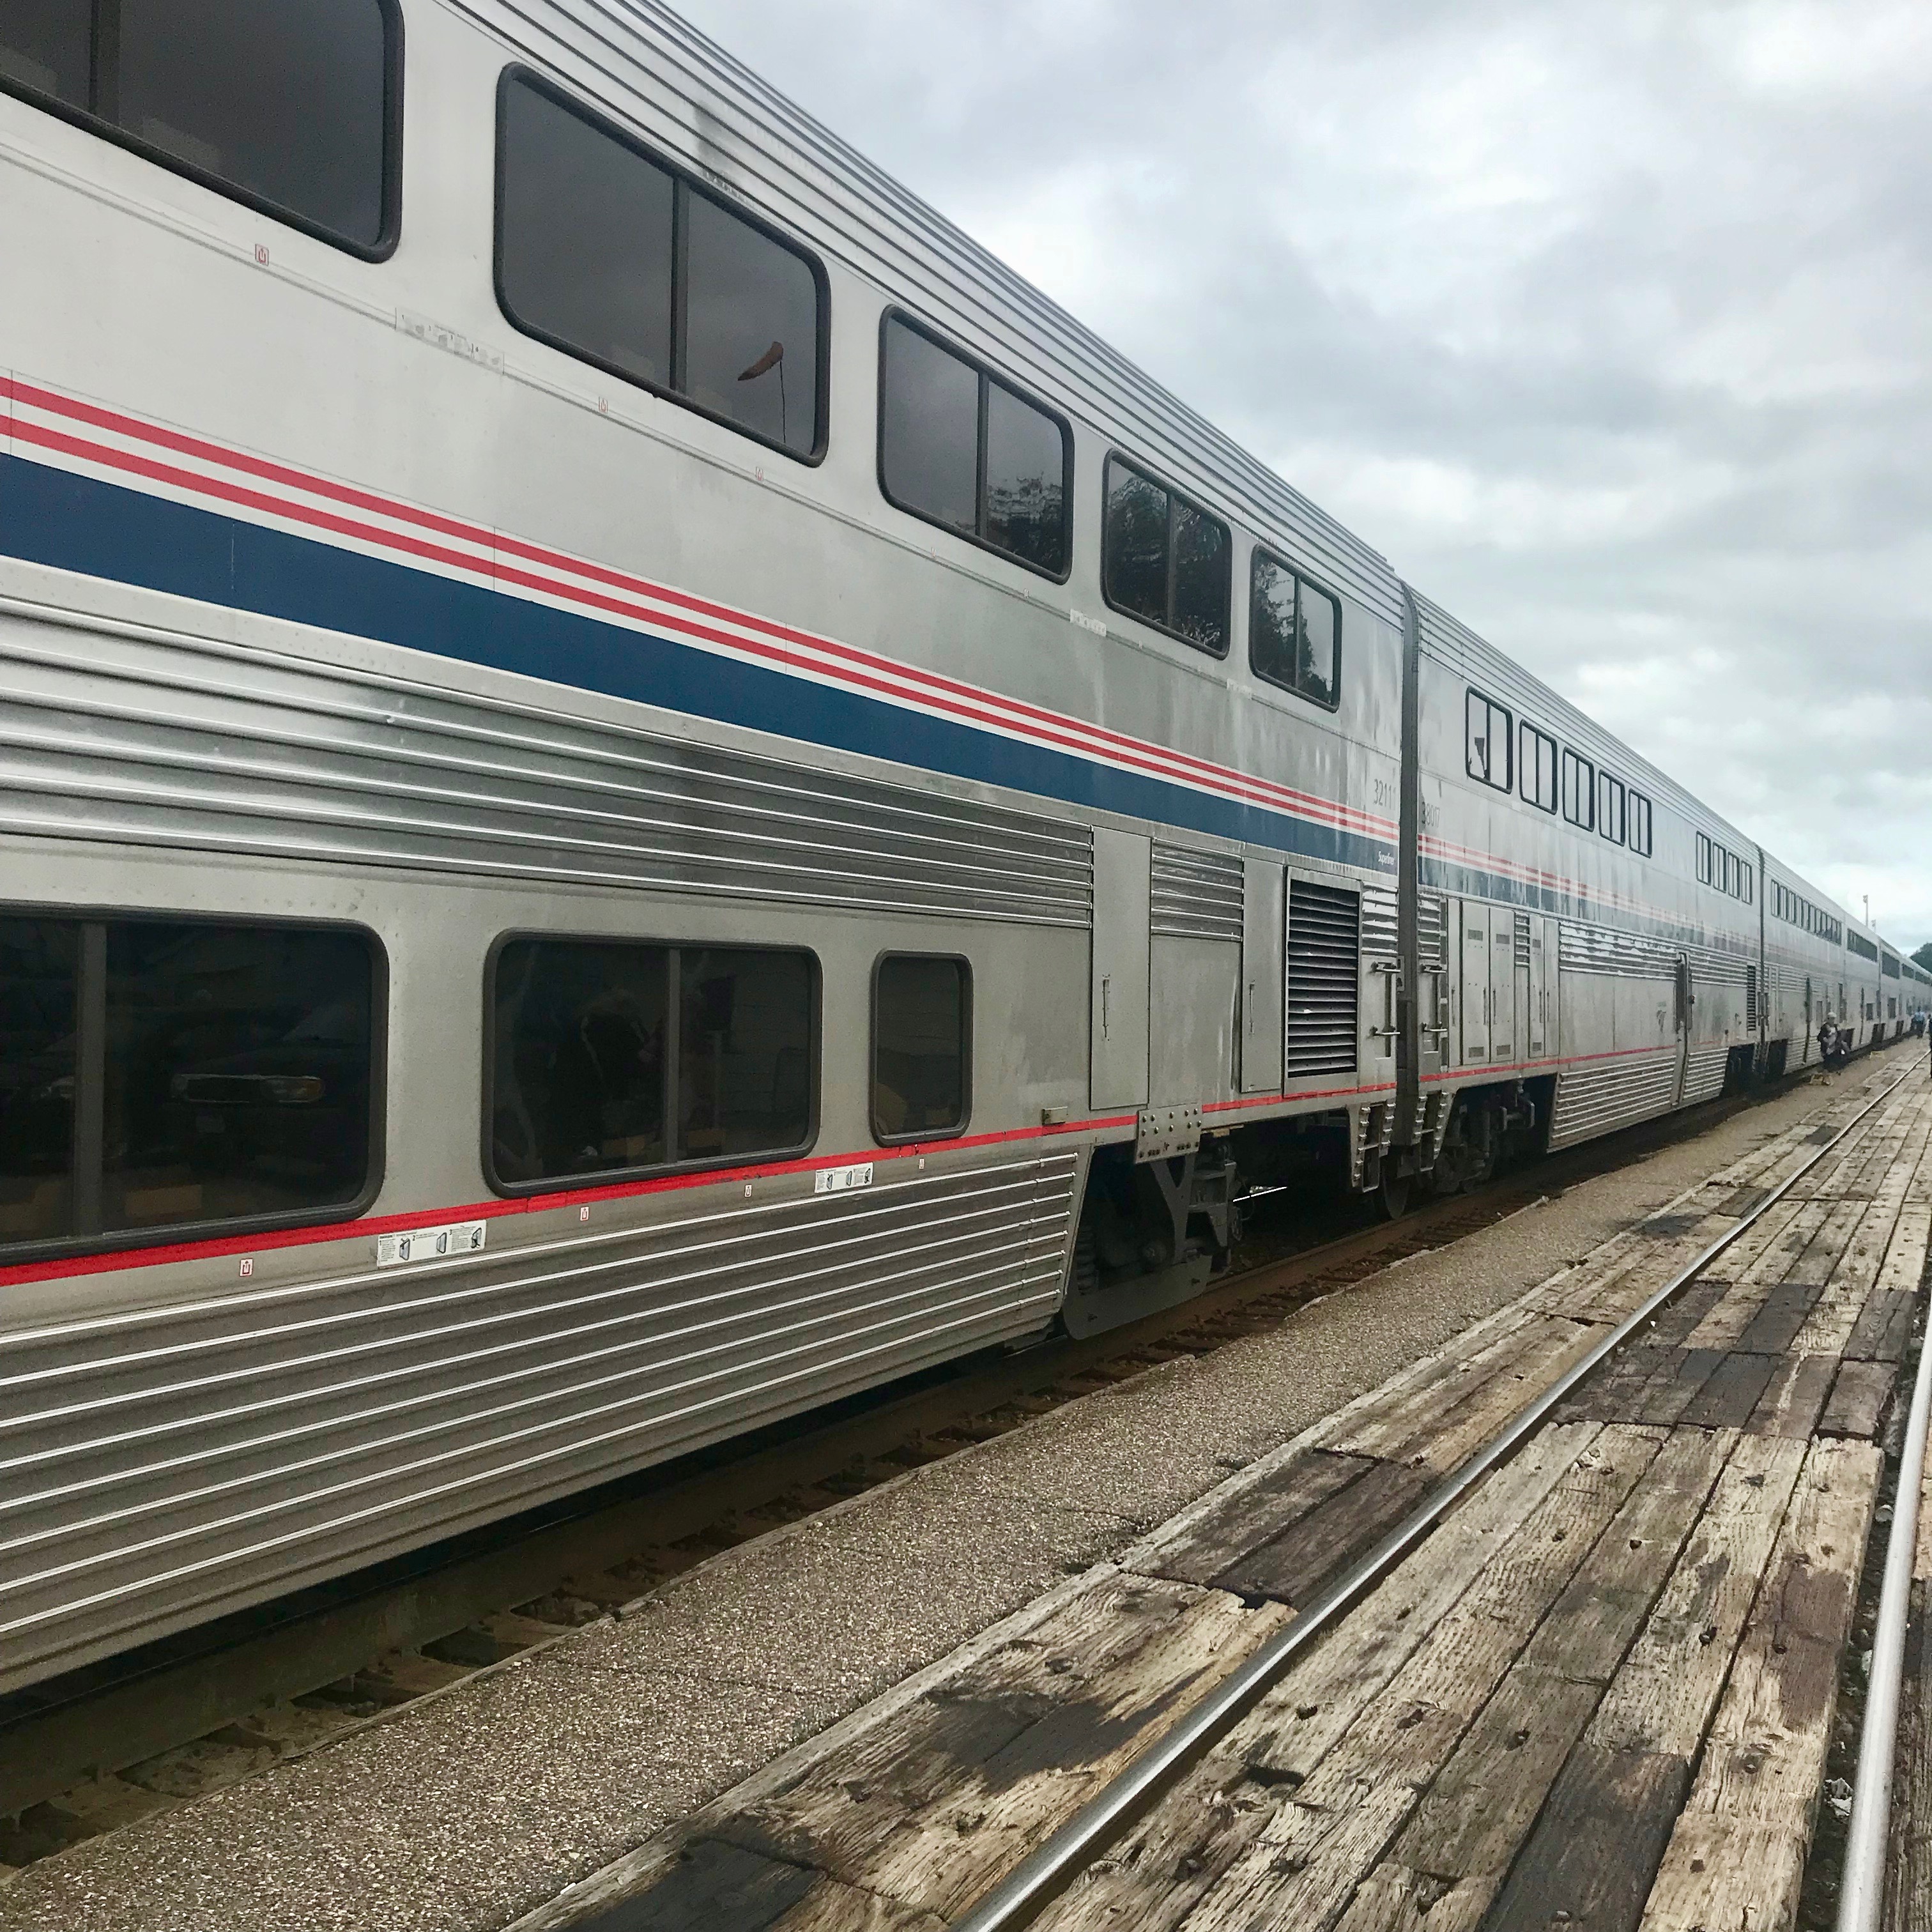 Amtrak long-distance trains that operate to/from/within the west are mostly double-decker Superliners.  There are a few seats and sleeping compartments on the lower levels, in addition to the restrooms and storage for carry-on luggage that is too bulky to take upstairs.  